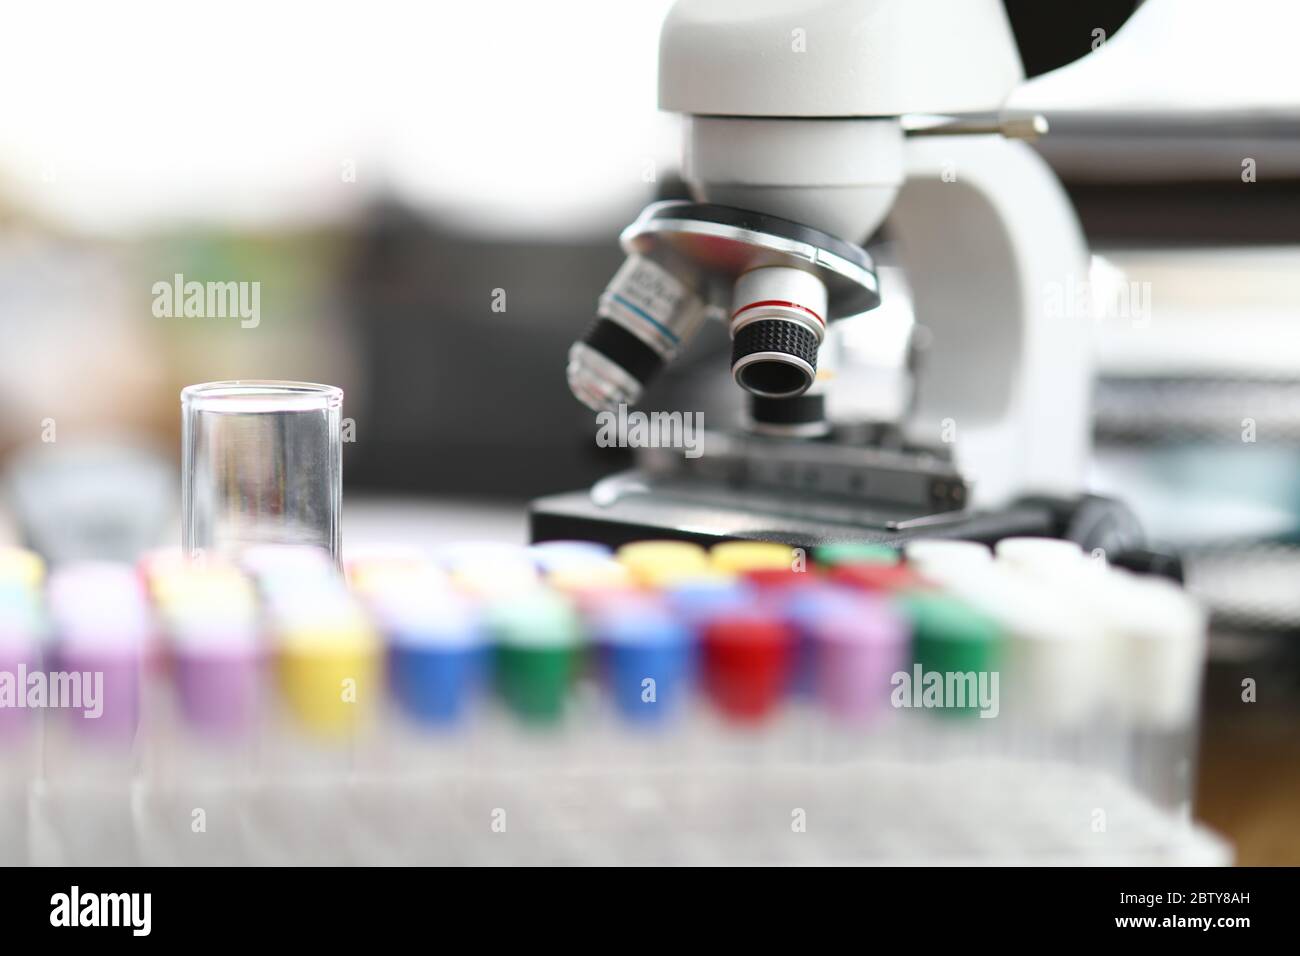 Equipment for science test Stock Photo